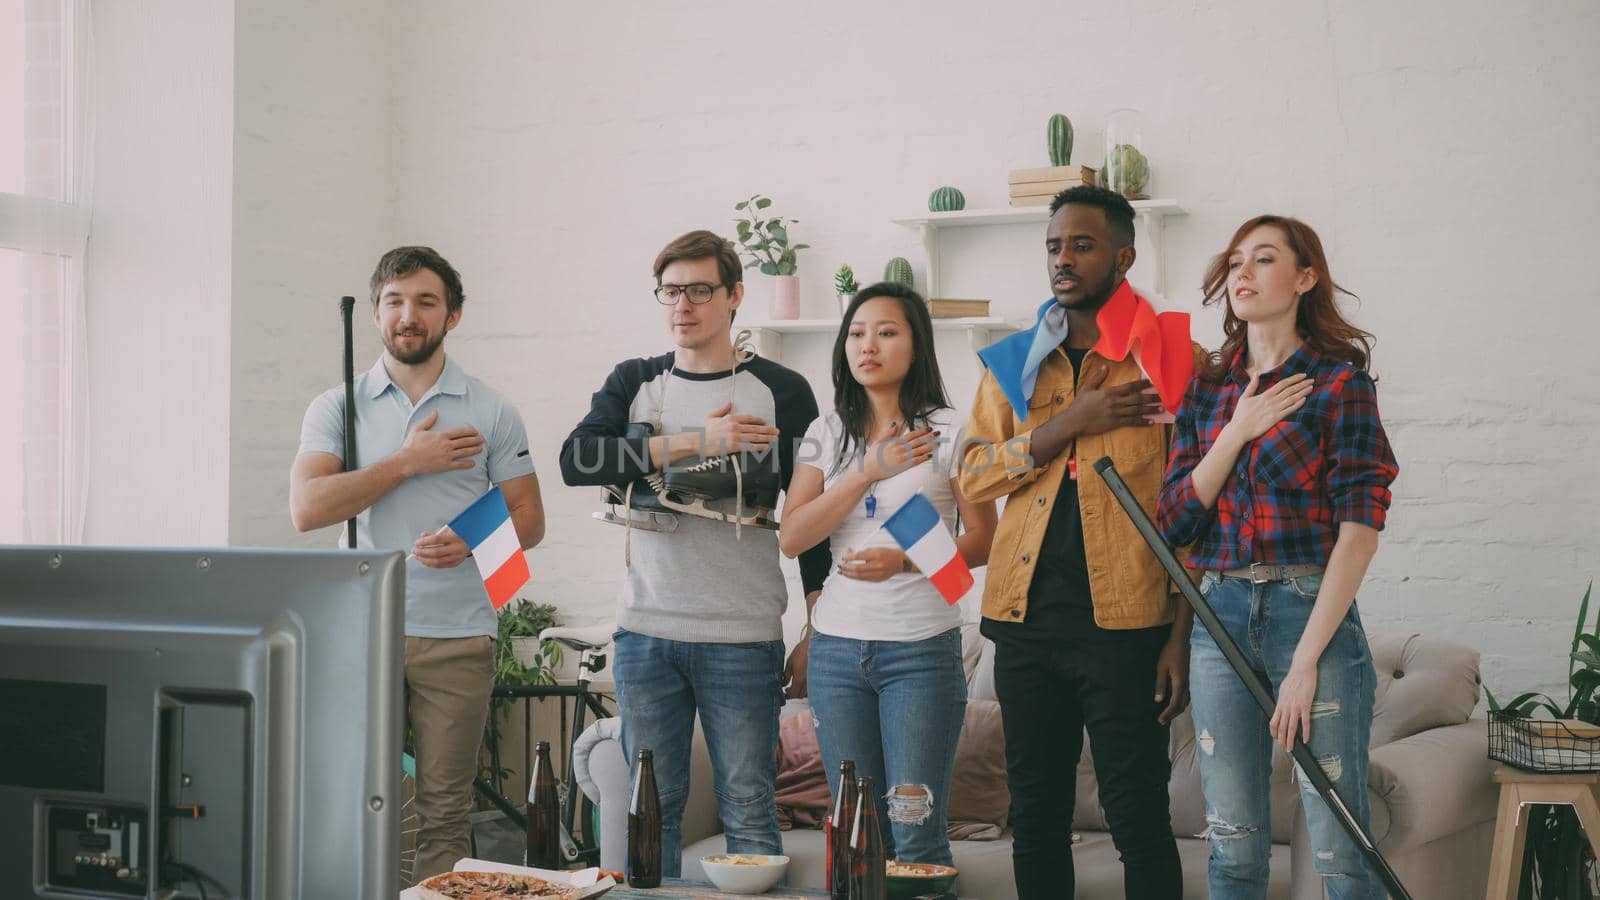 Multi ethnic group of friends sport fans listening and singing French national anthem before watching sports championship on TV together at home indoors